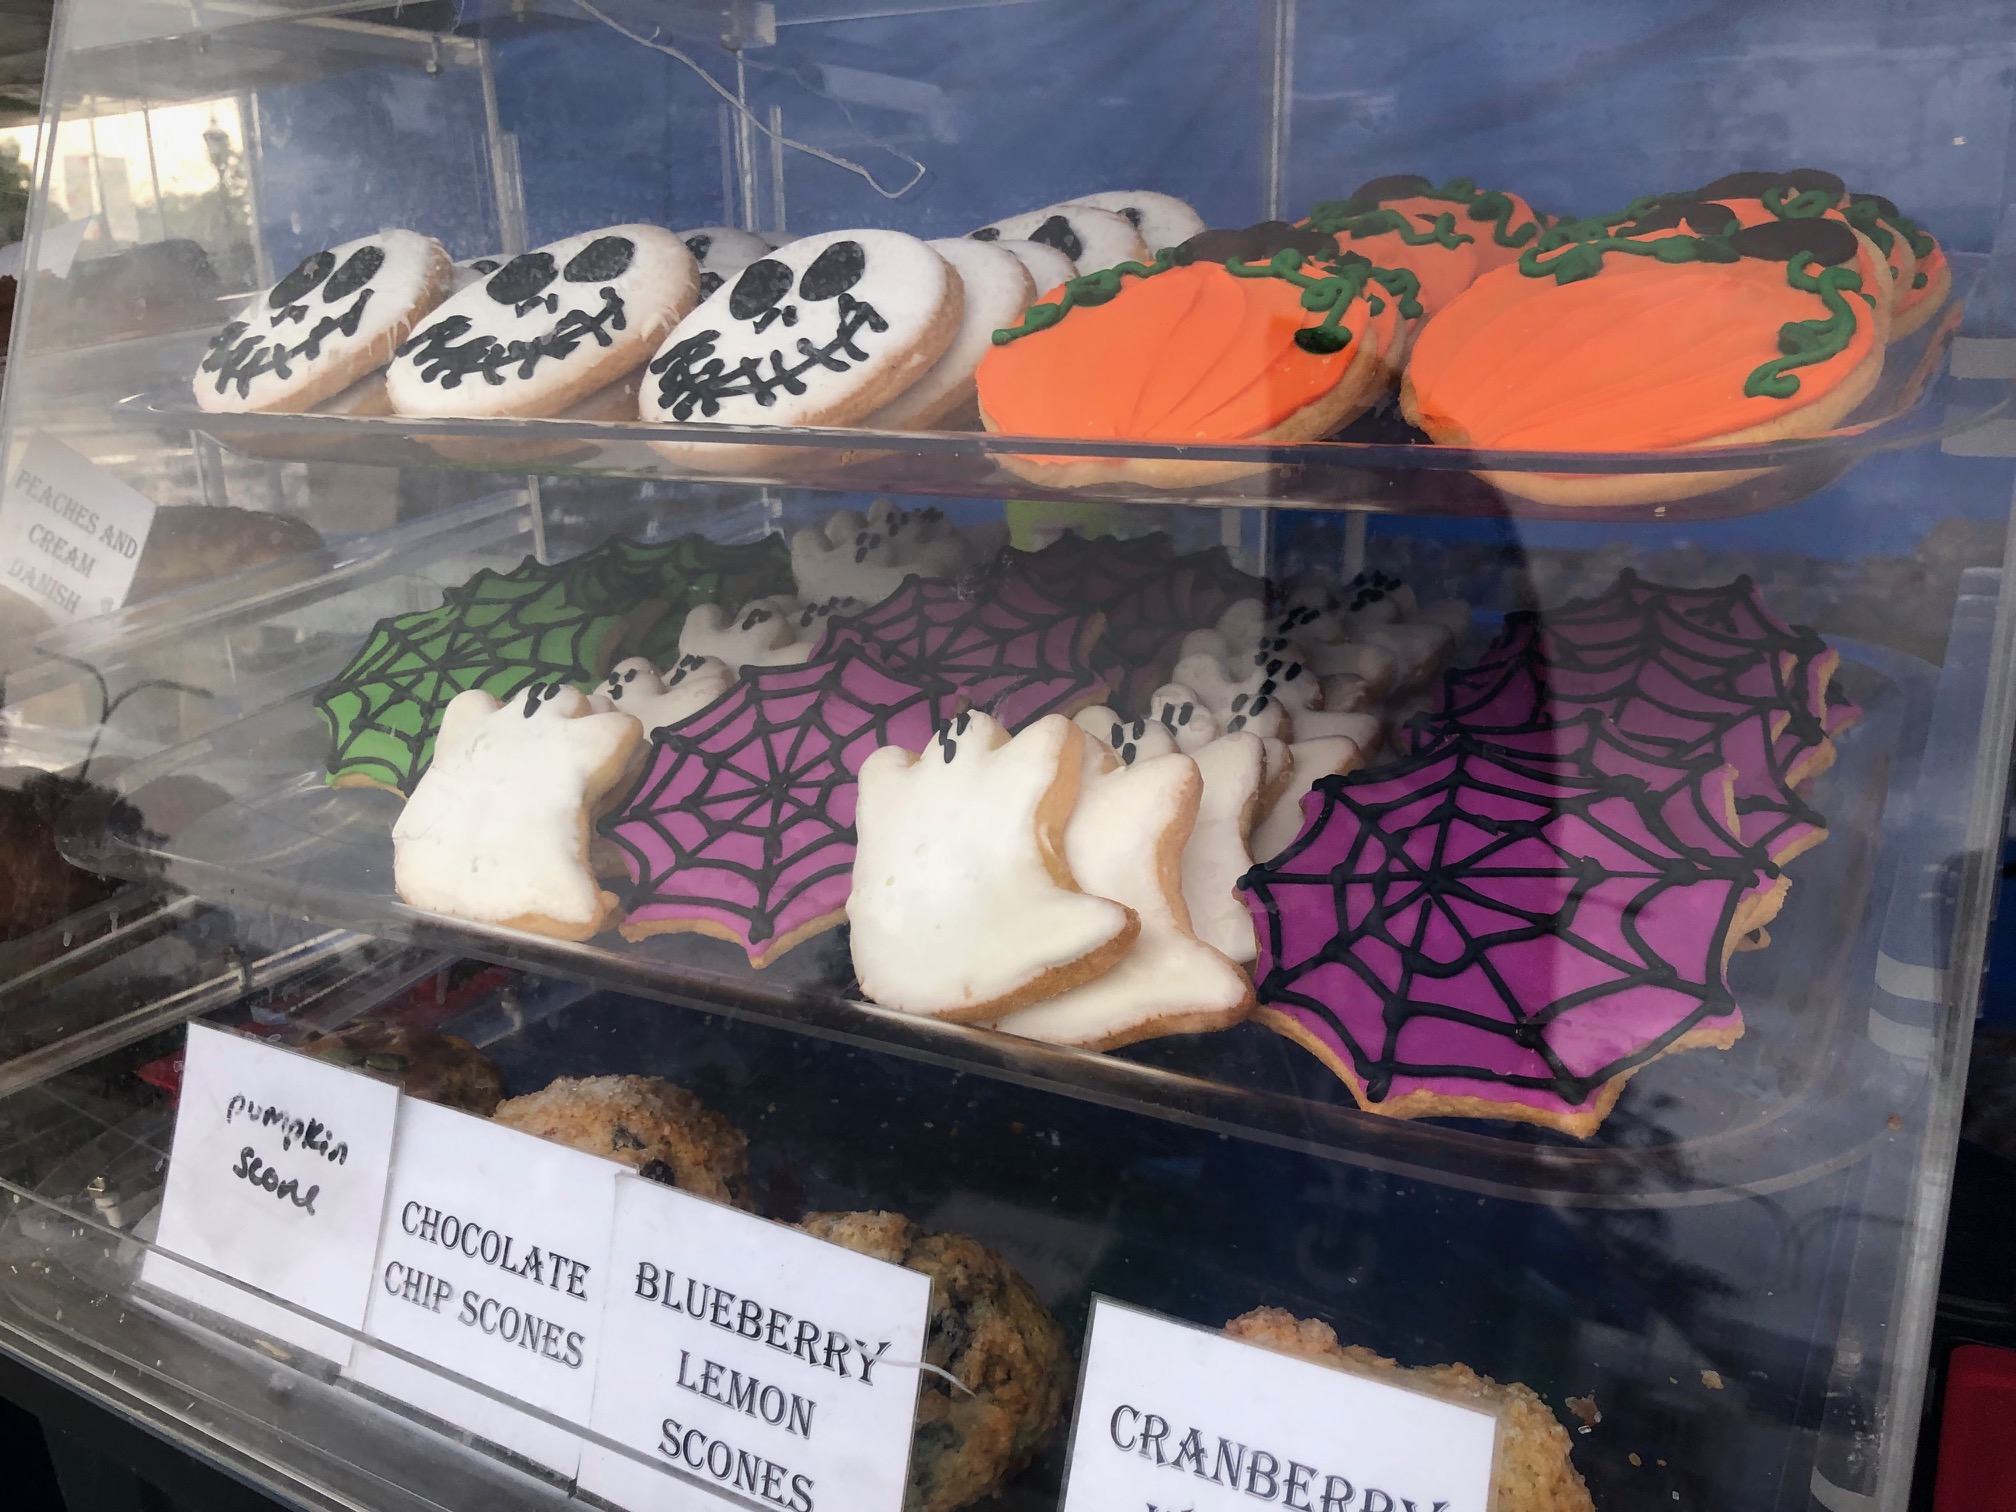 Inside a clear plastic case, there are Halloween themed cookies ghosts, spiderwebs, and scary faces. Photo by Alyssa Buckley.